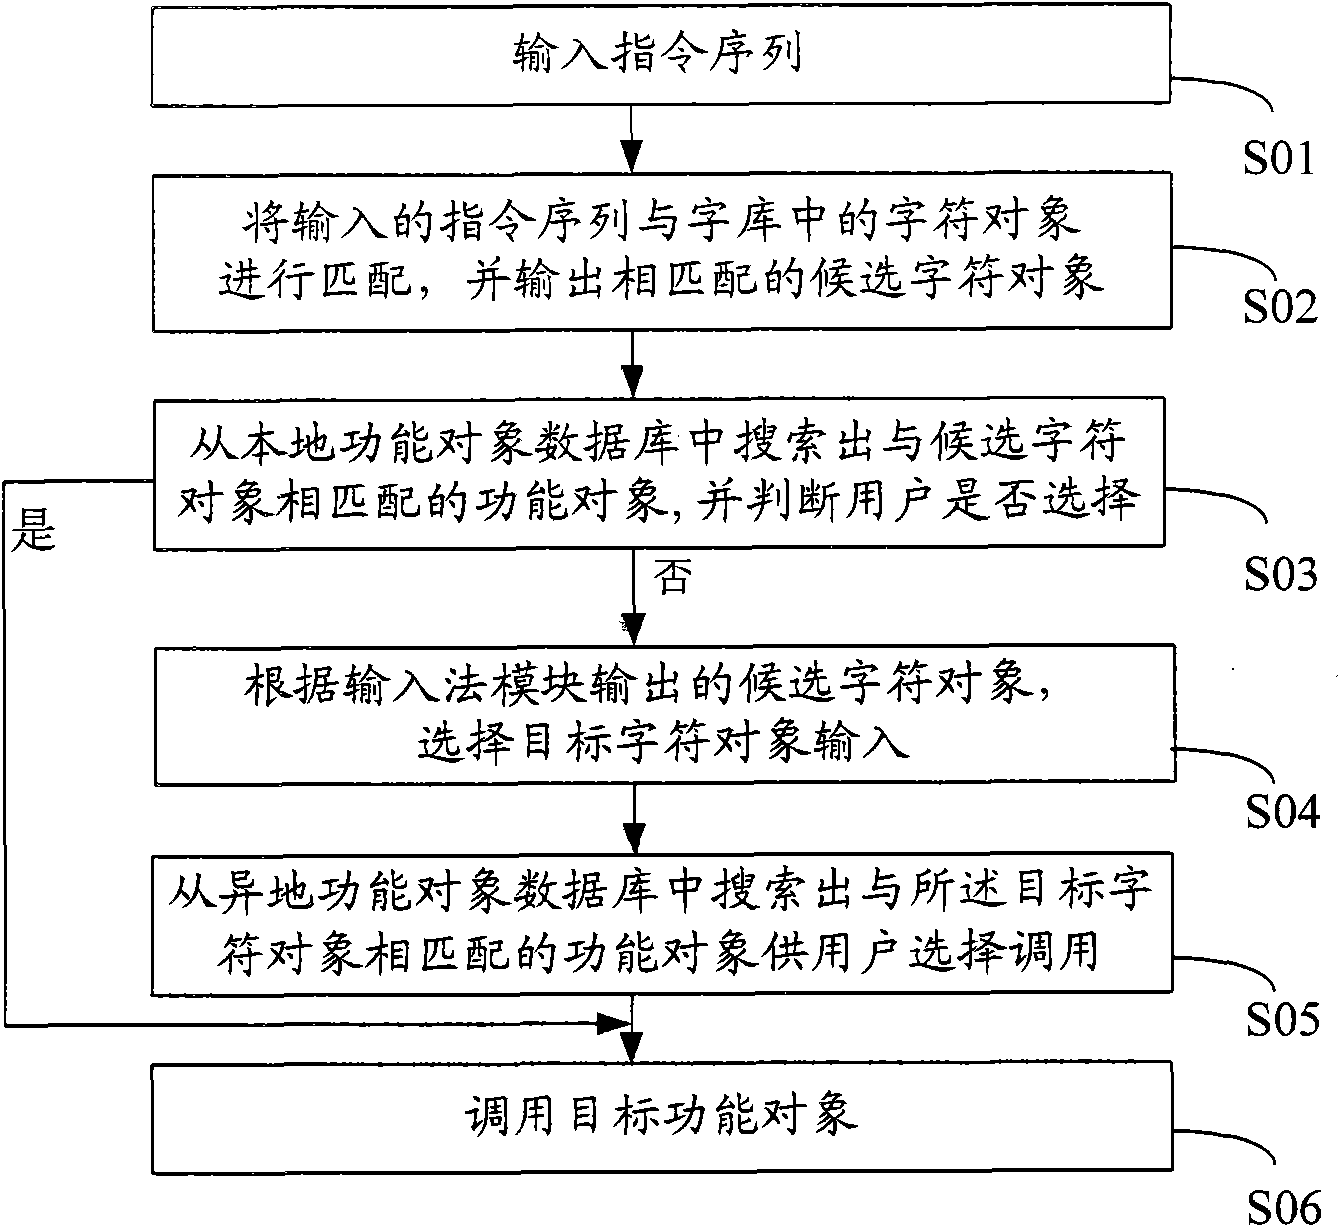 Intelligent operating system and method